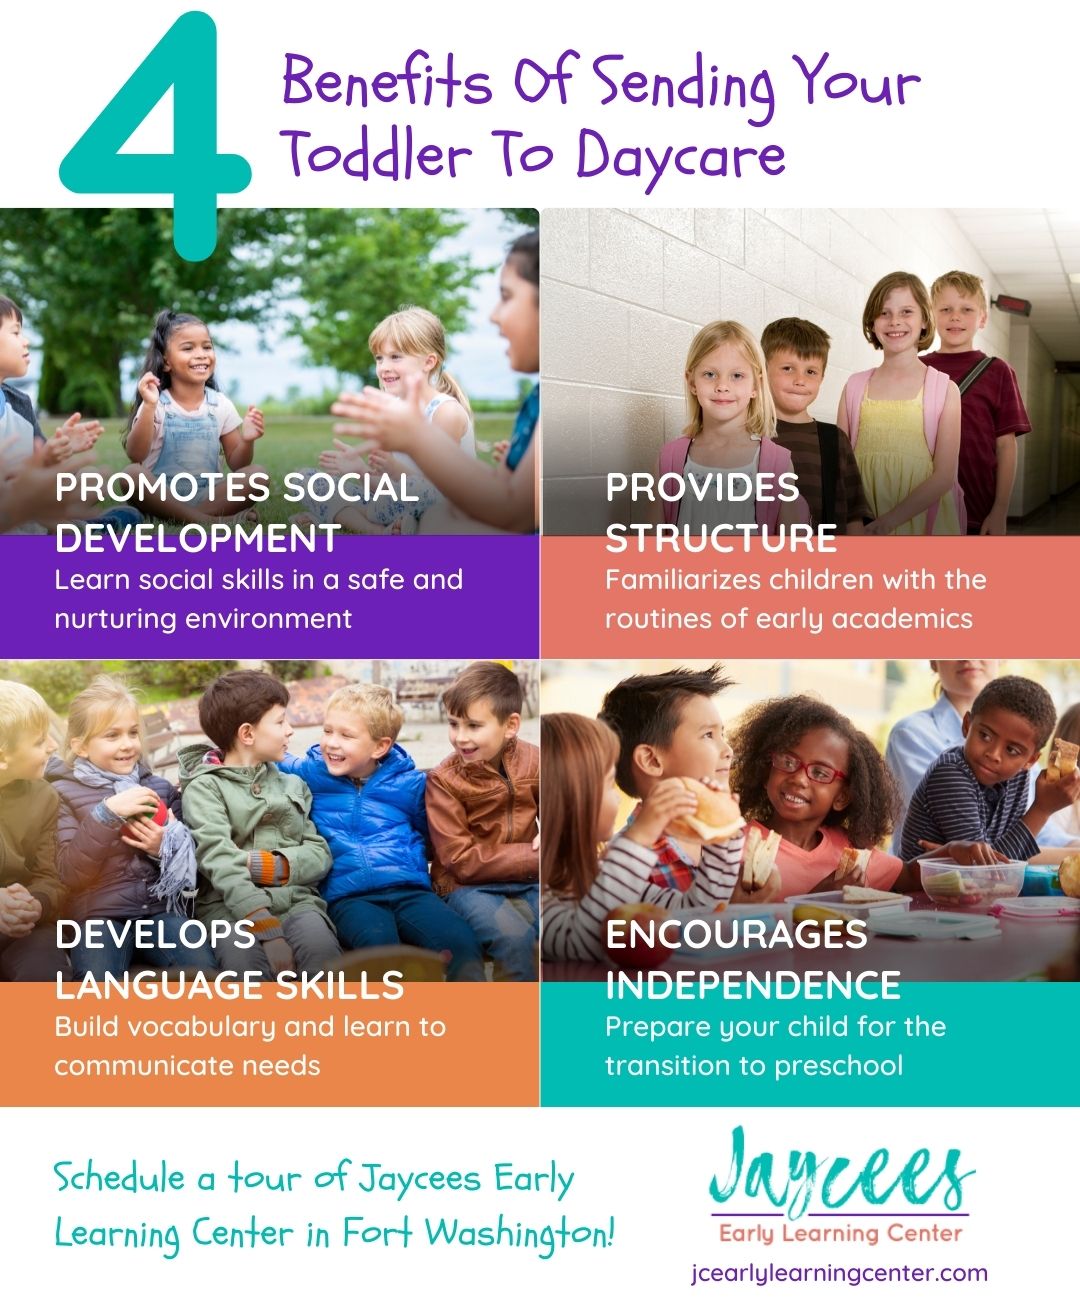 4 Benefits Of Sending Your Toddler To Daycare Infographic